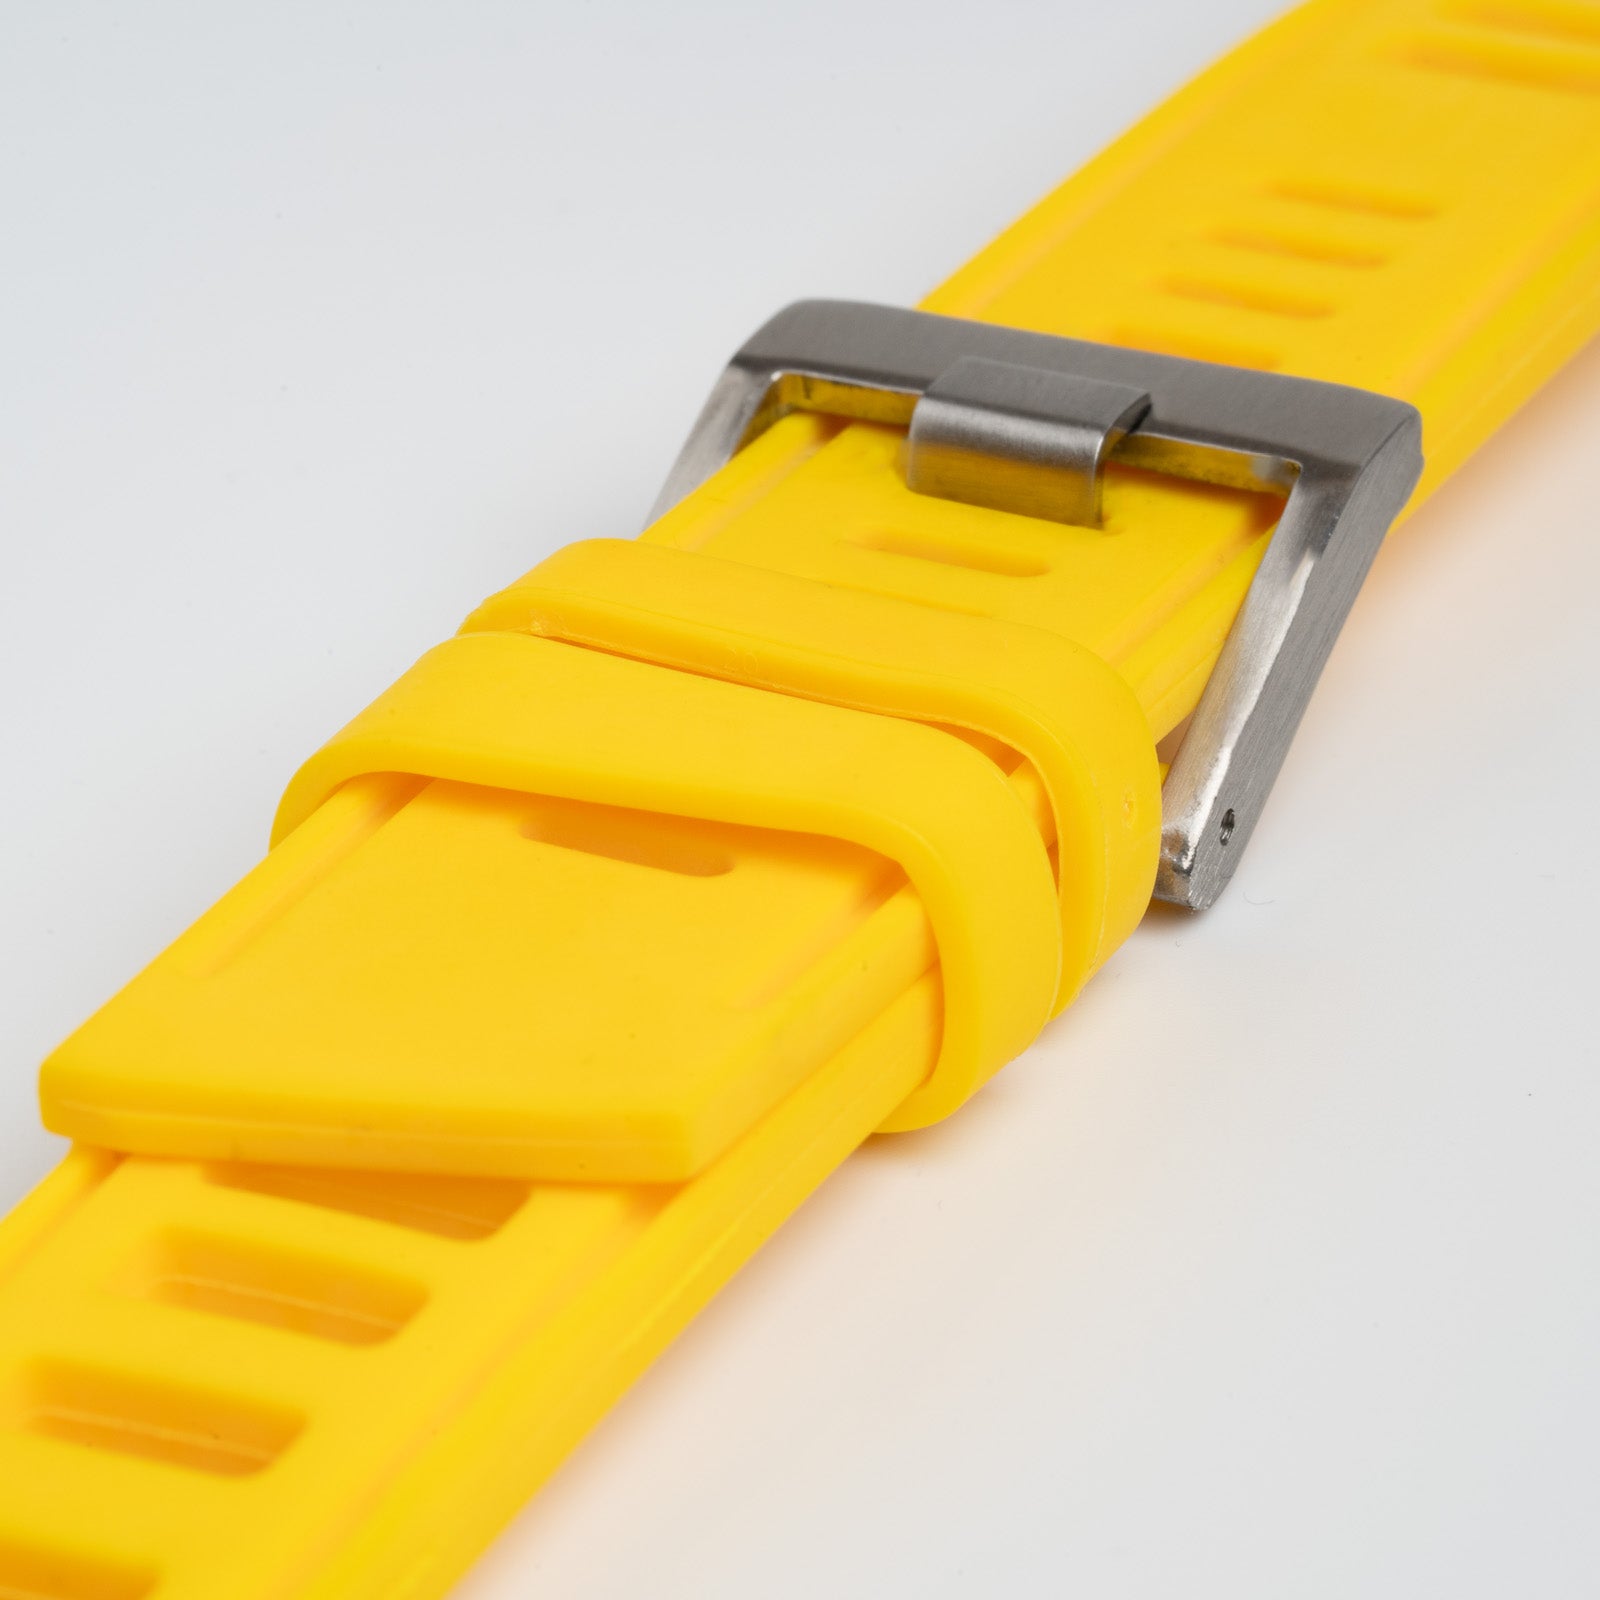 Submerge ISO Dive Yellow Watch Strap